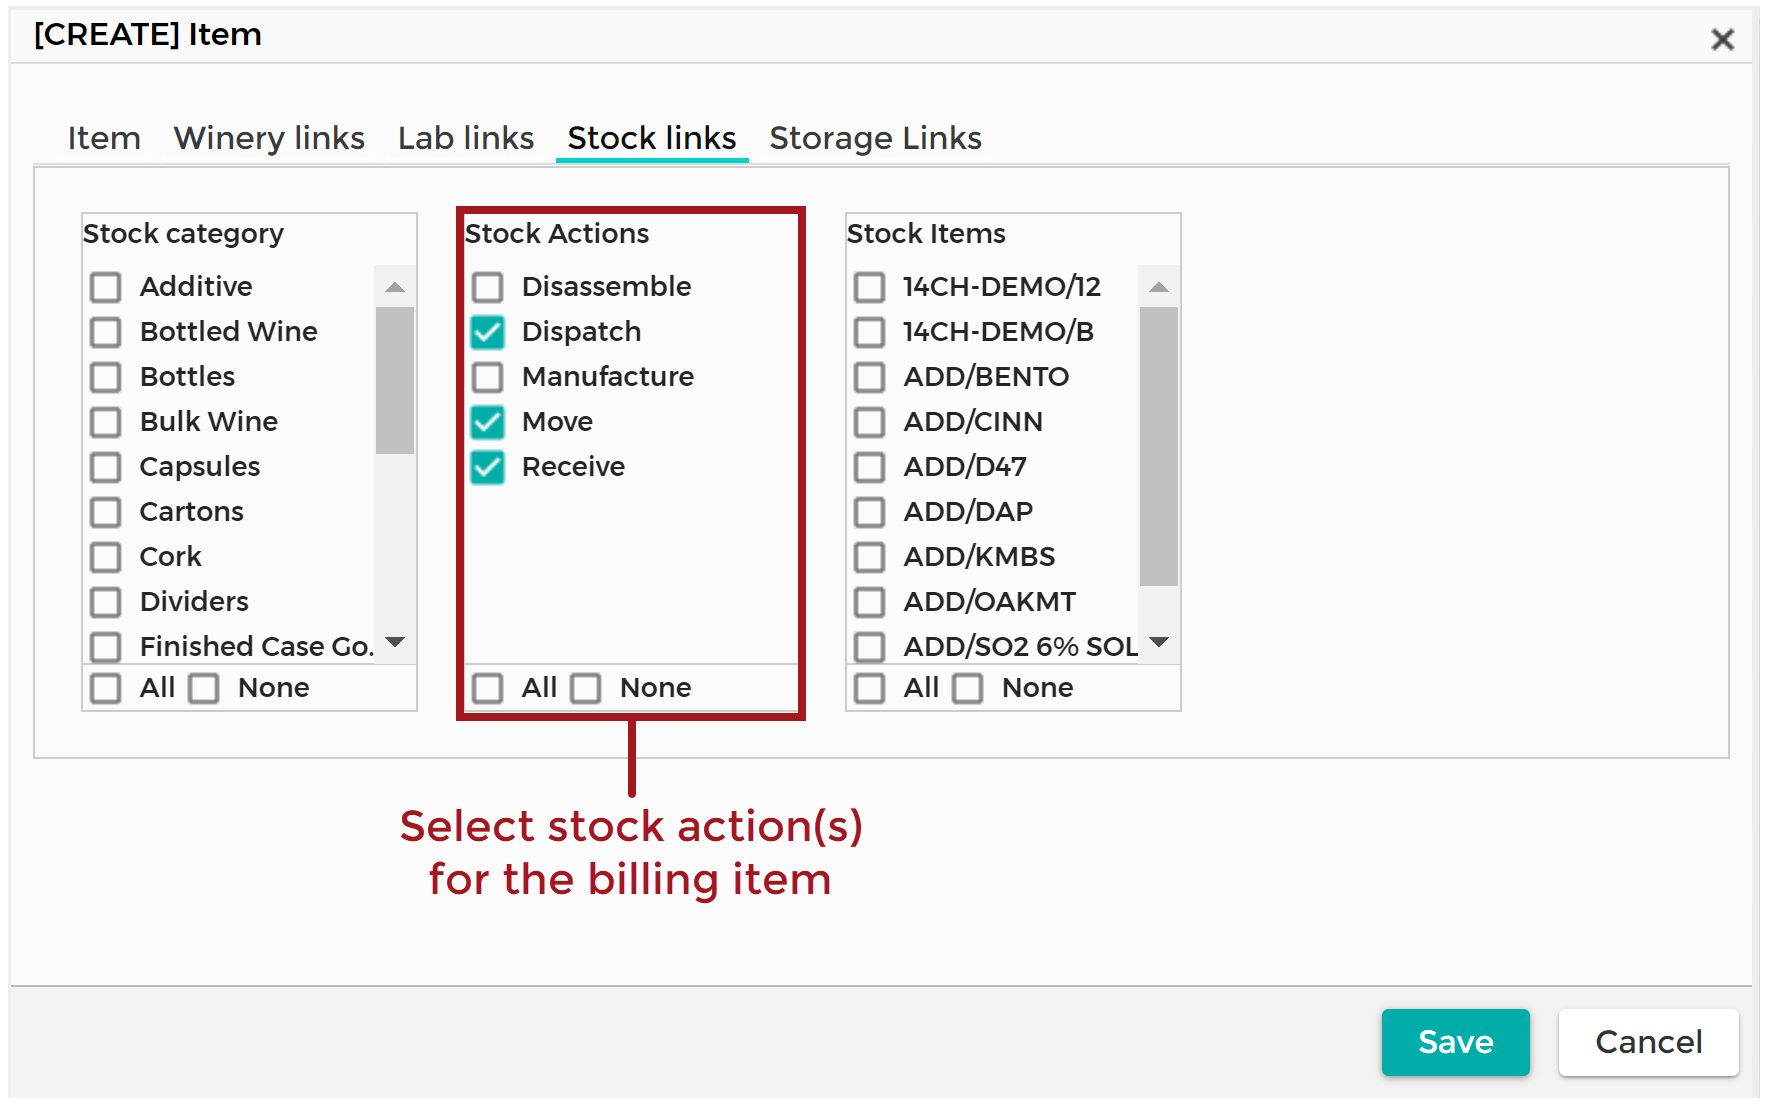 Create_Item_-_Stock_Links_-_Stock_Actions_20200719.png